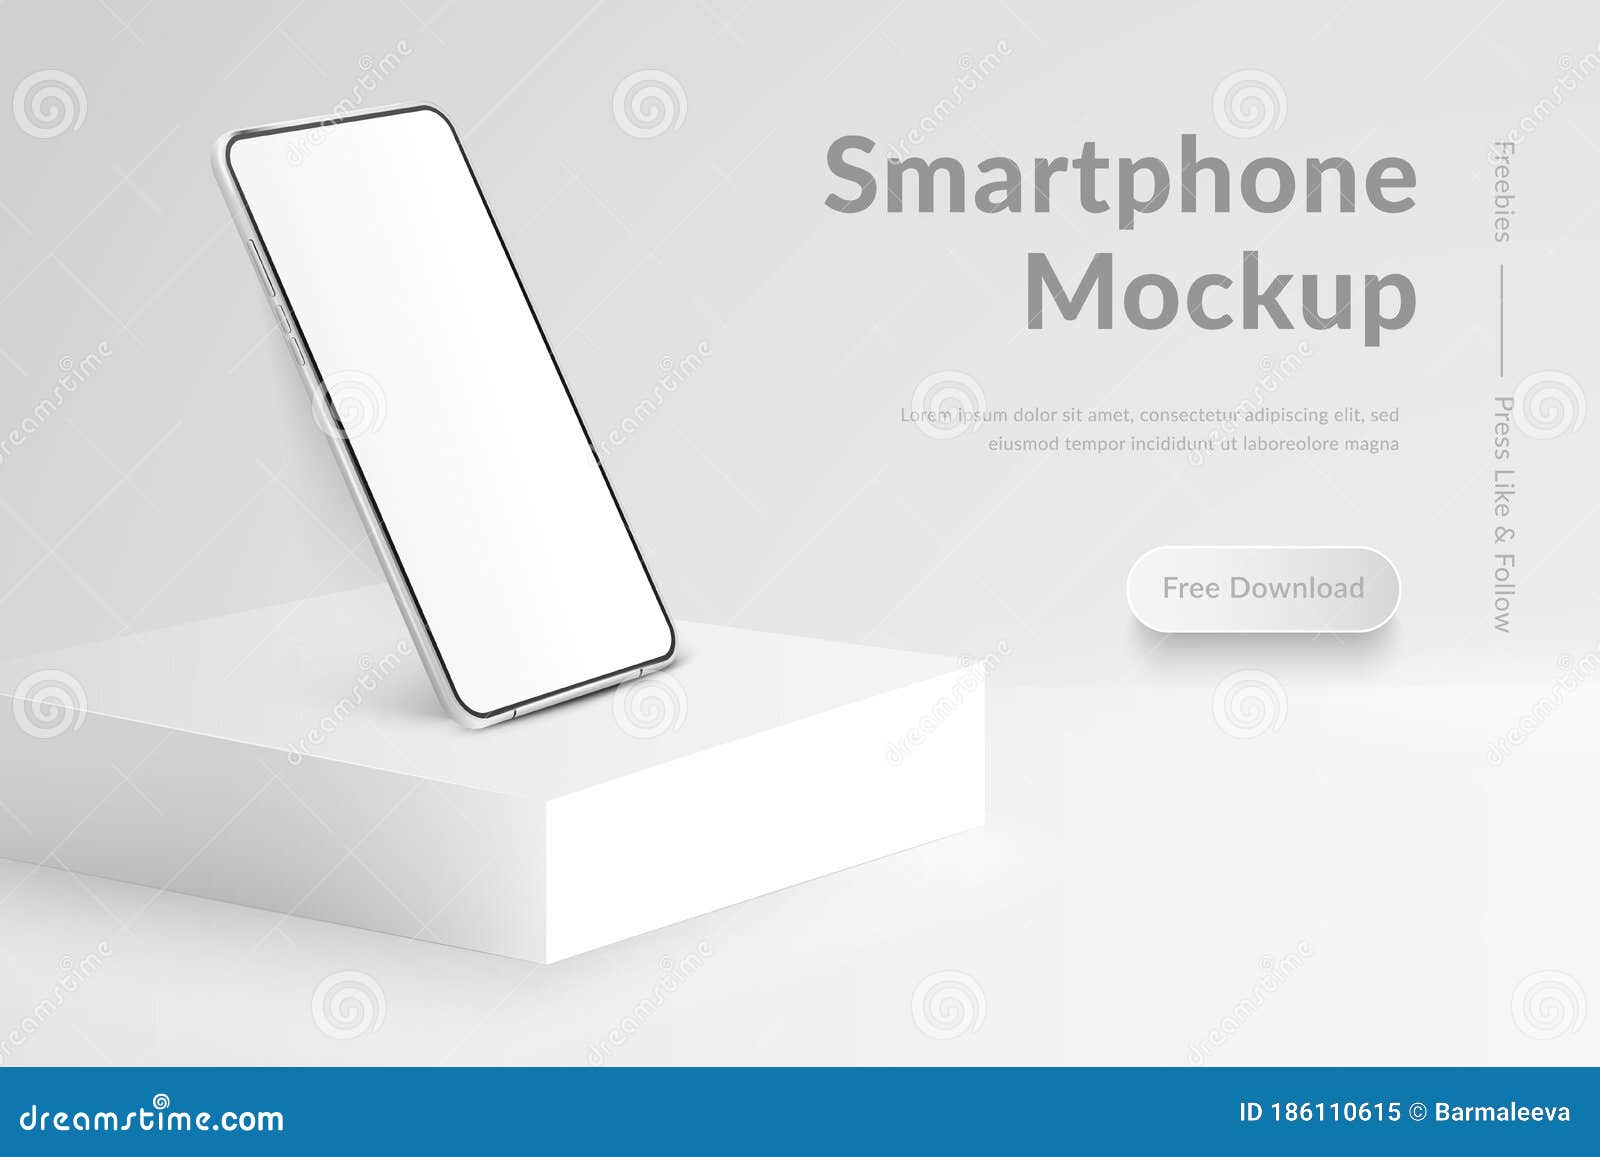 White Smartphone Mockup on Square Podium. 3d Mobile Phone with Blank White Screen. Modern Cell Phone Template Stock Vector - Illustration of smartphone, 186110615